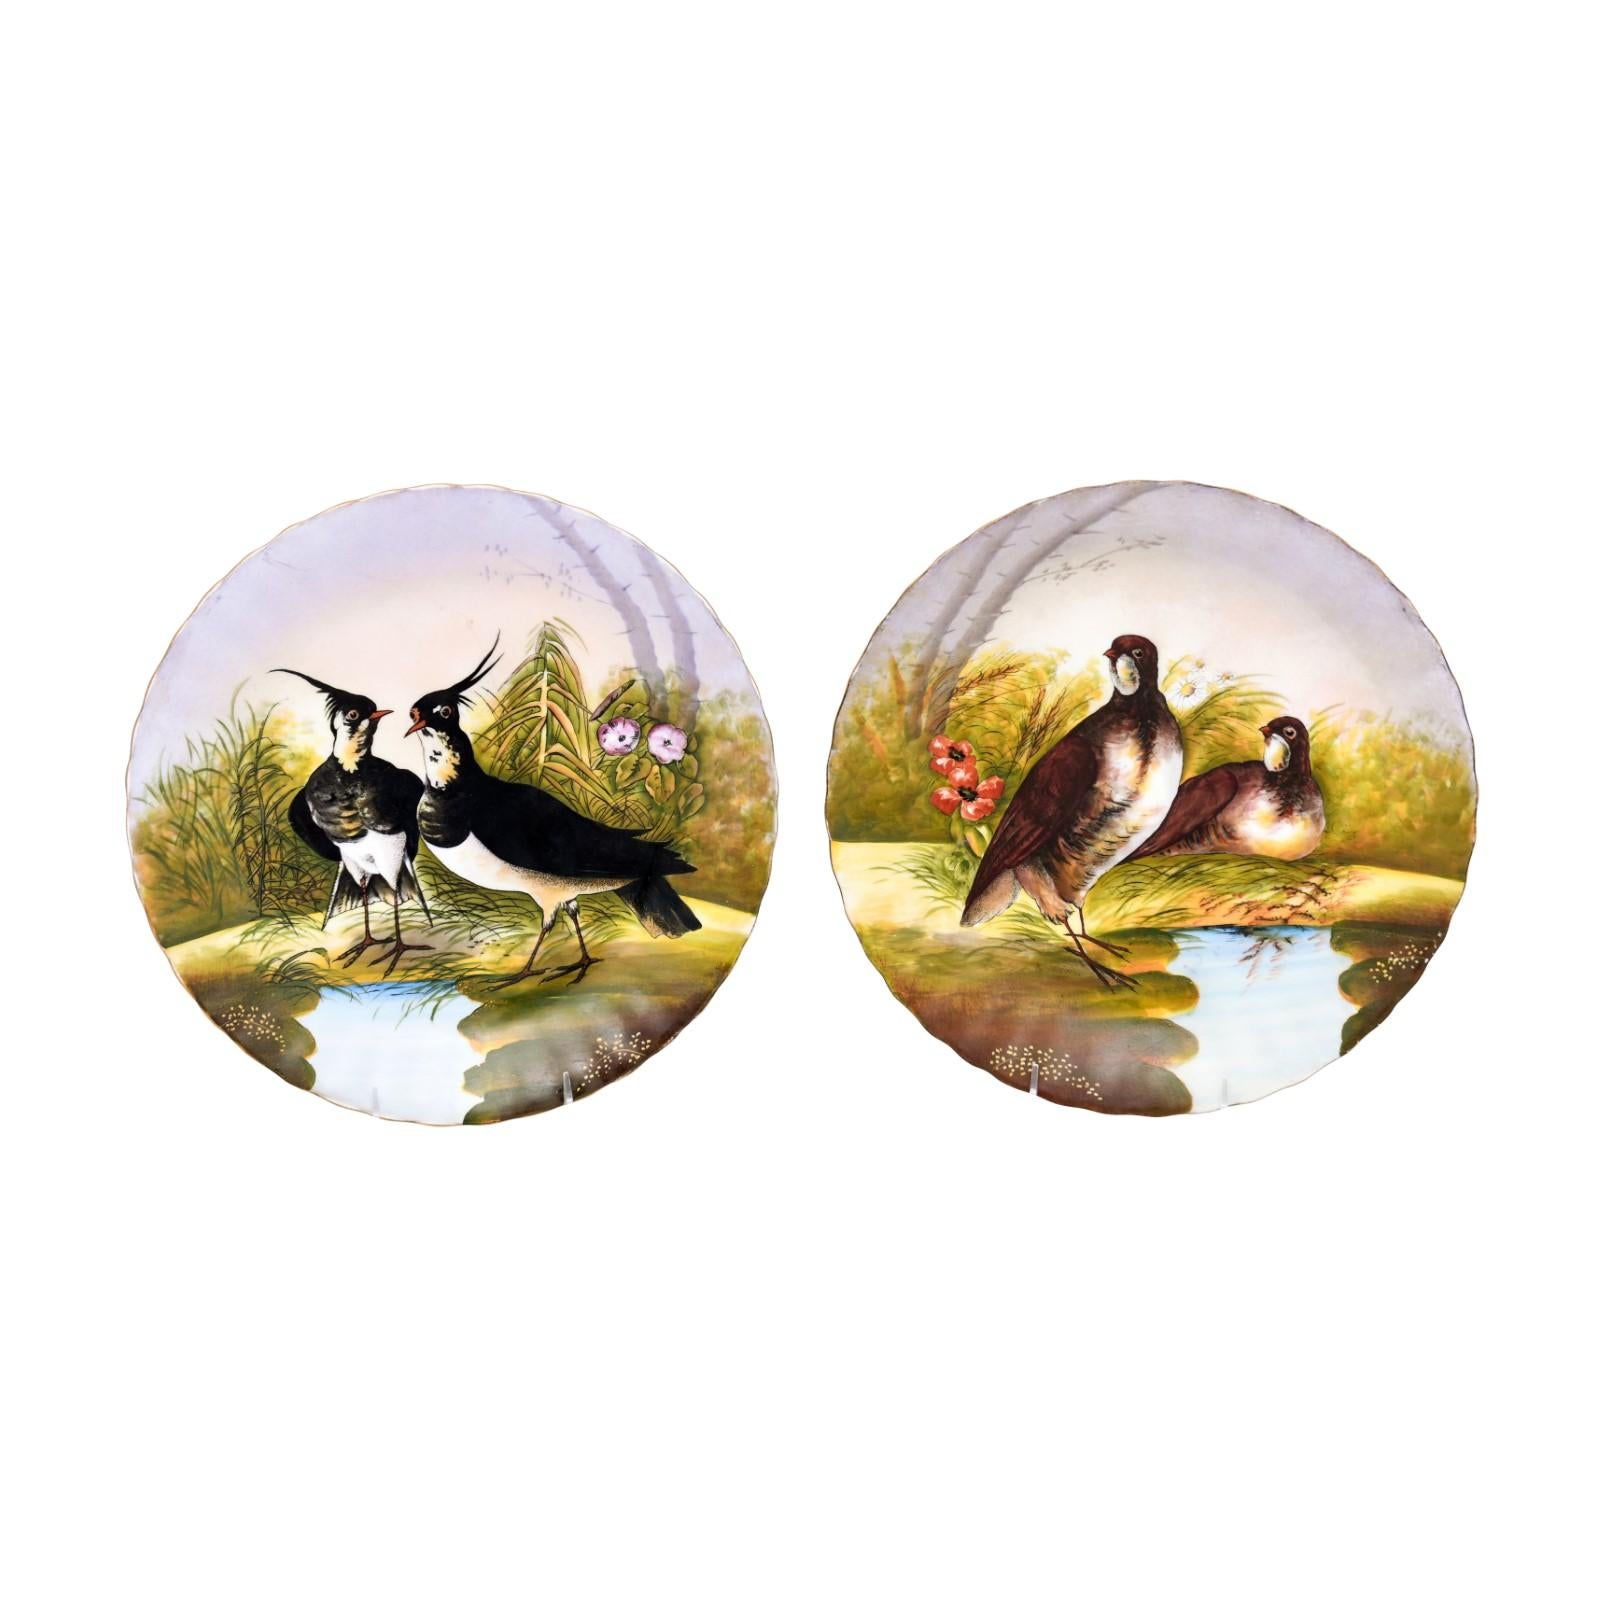 A pair of French Limoges porcelain decorative plates from the 20th century, depicting birds. Created in southwest central France during the 20th century, this pair of Limoges porcelain plates attracts our attention with its delicate décor showcasing